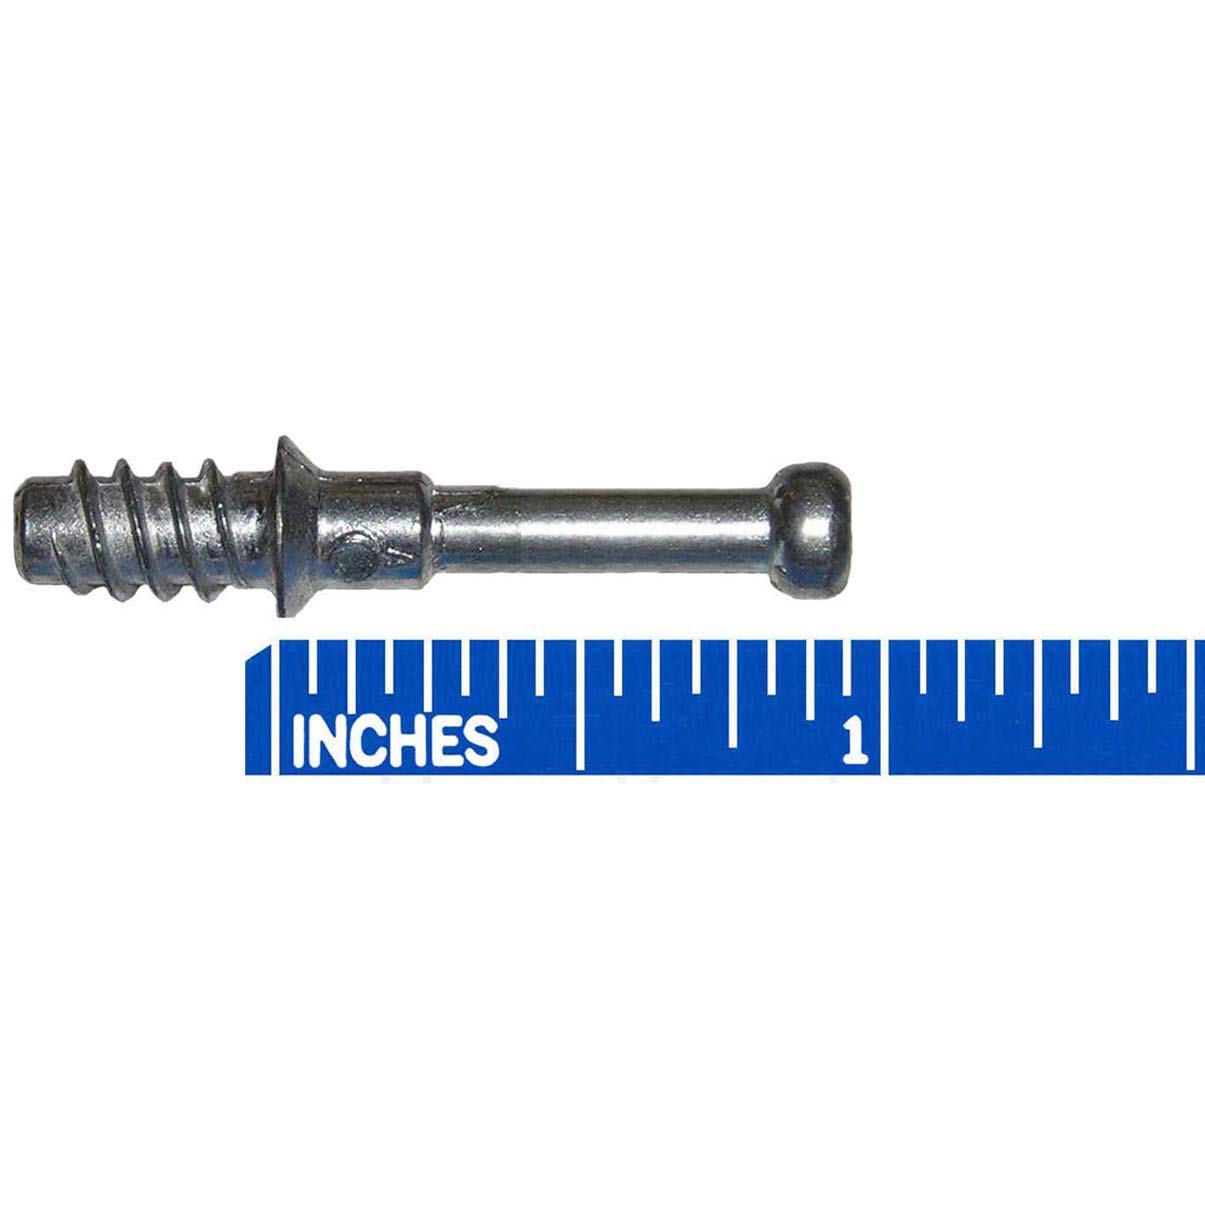 24mm (35mm Overall) Dowel Pin for Cam Lock Disc Furniture Connectors 11mm Long Euro Wood Thread Fits 5mm Hole (10 Pack) Fits Titus